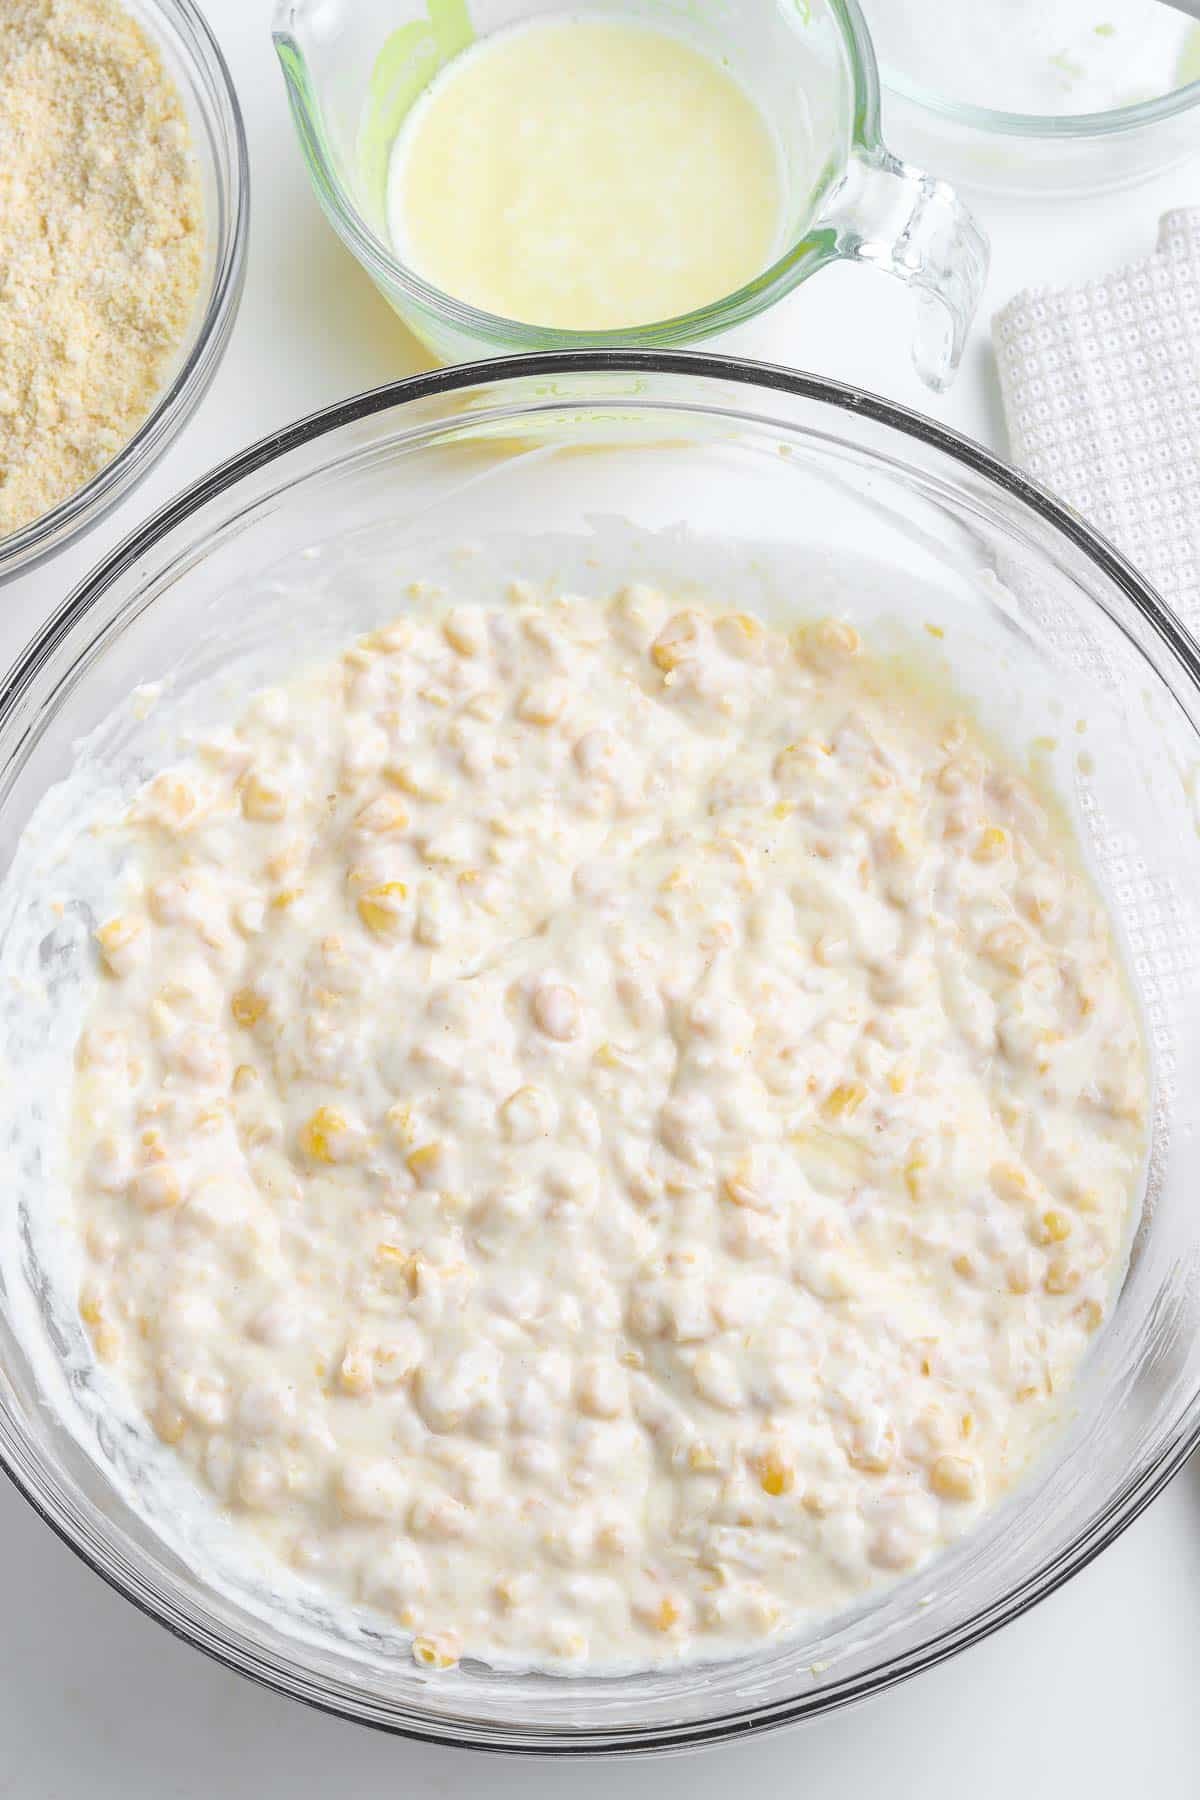 A bowl of corn casserole mixture in a glass mixing bowl.